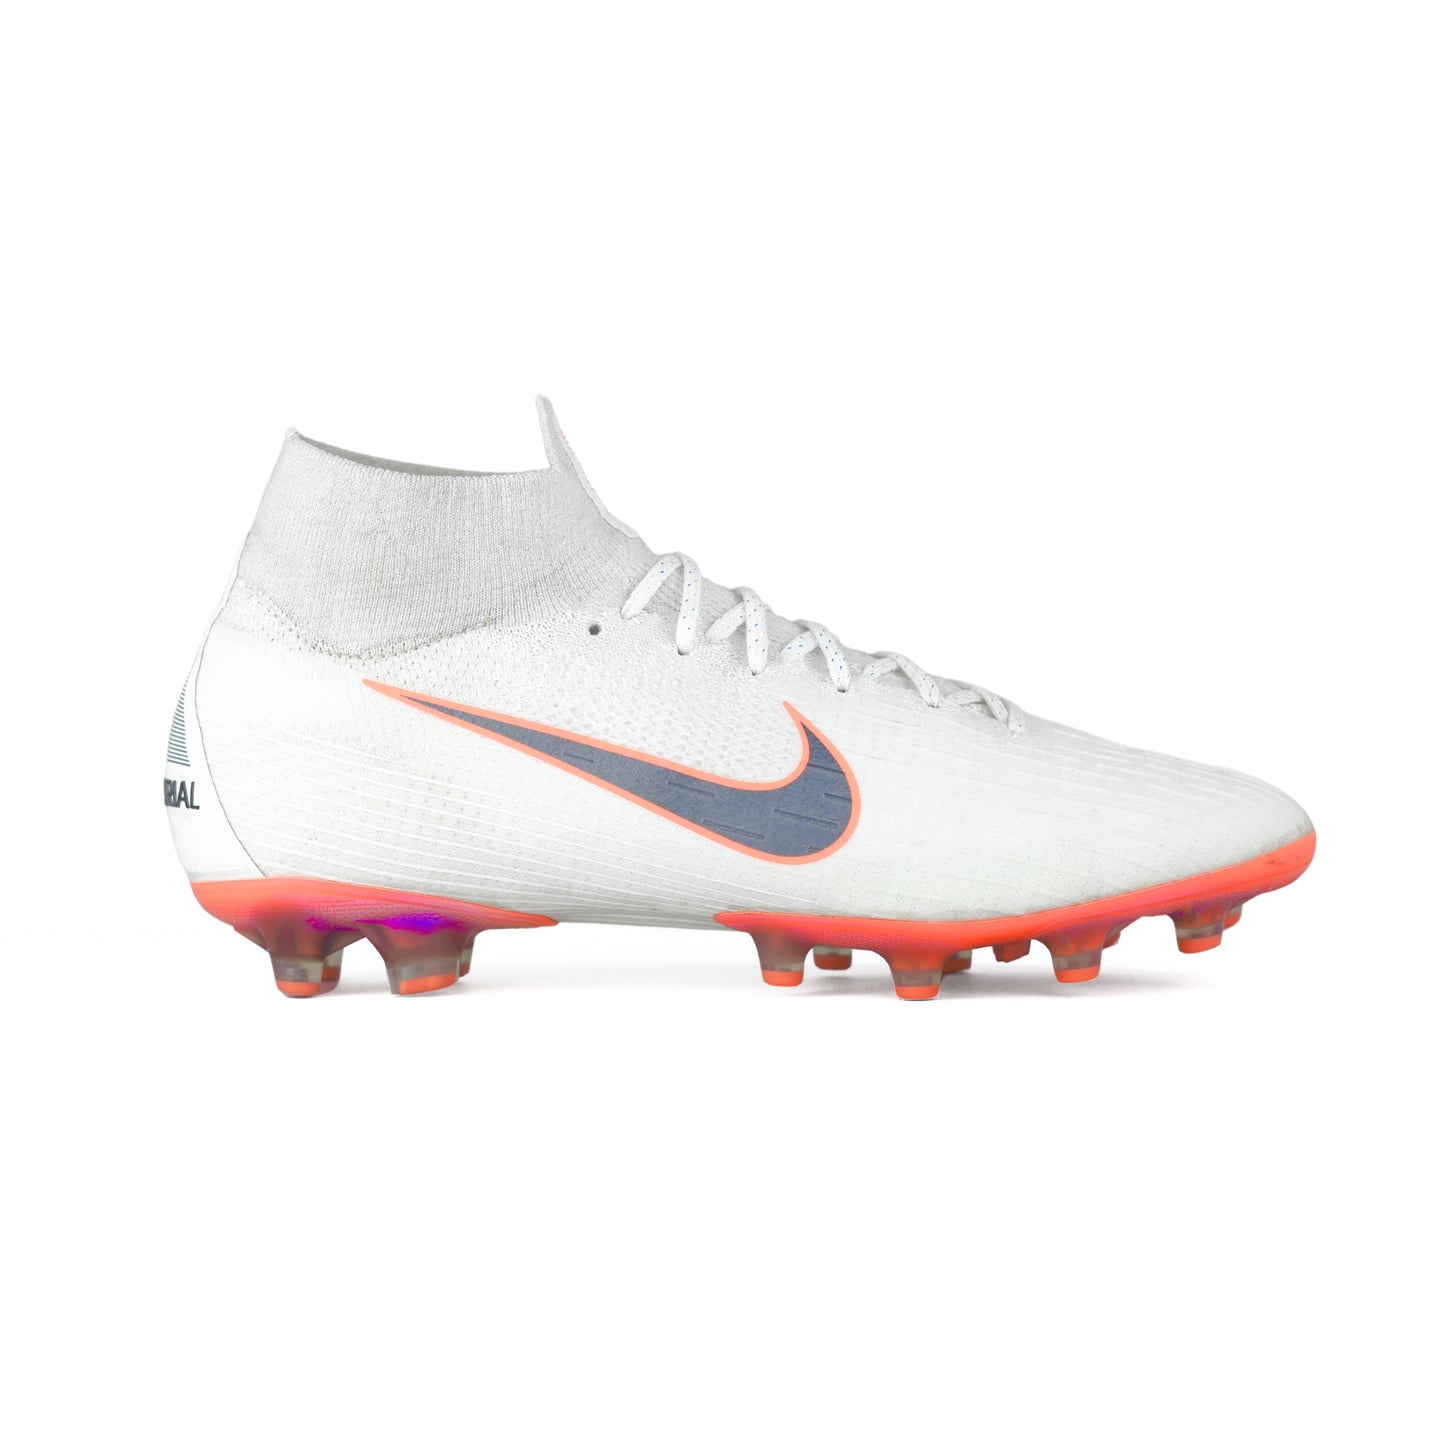 NIKE MERCURIAL SUPERFLY 6 AG-PRO - 2018 WORLD CUP